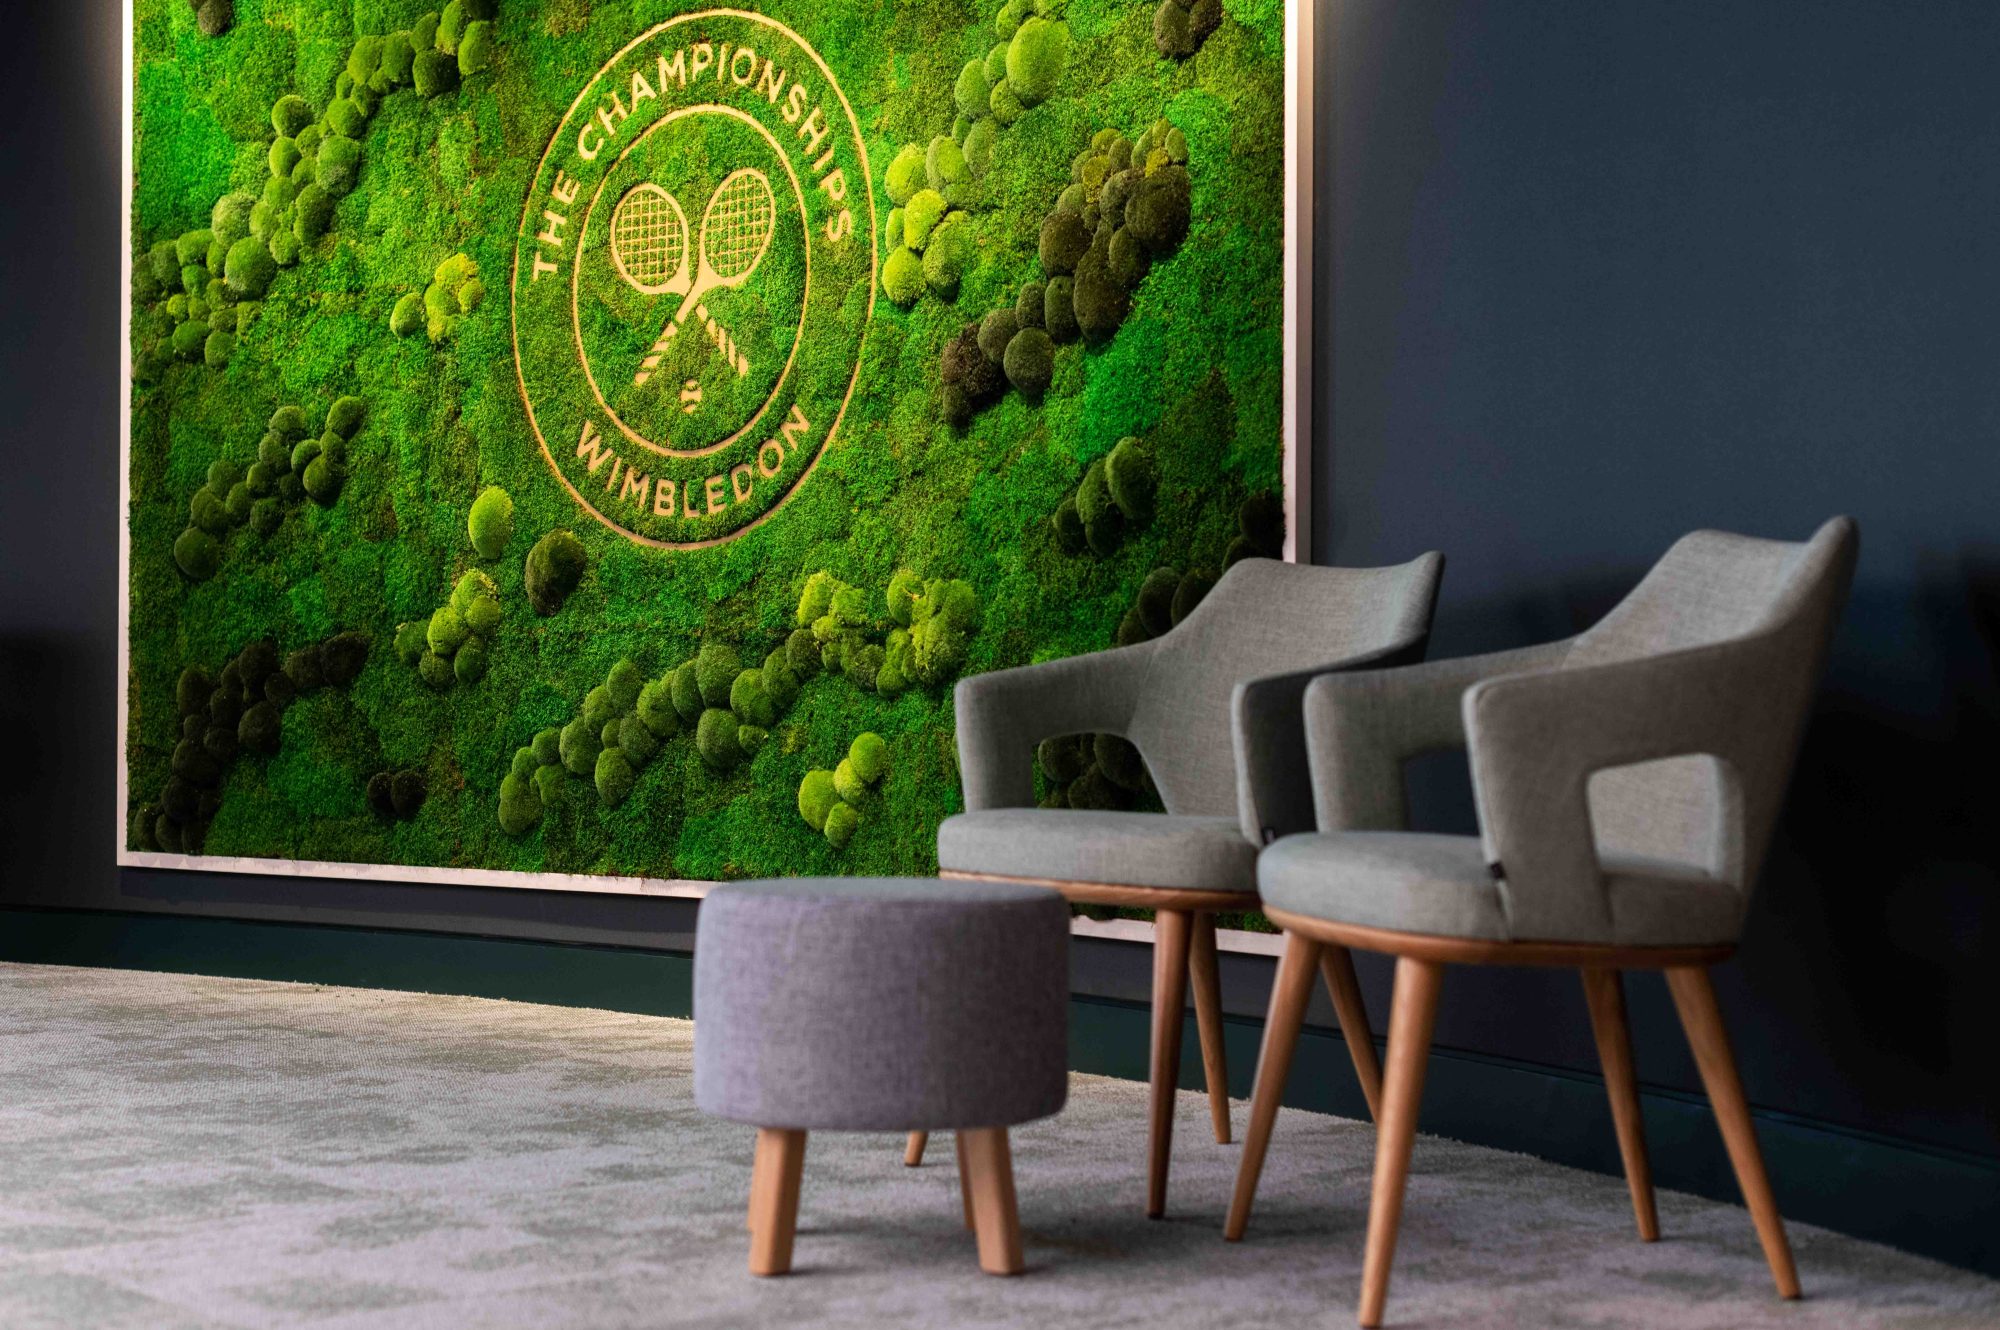 Decorative acoustic wall design of the championships Wimbledon logo